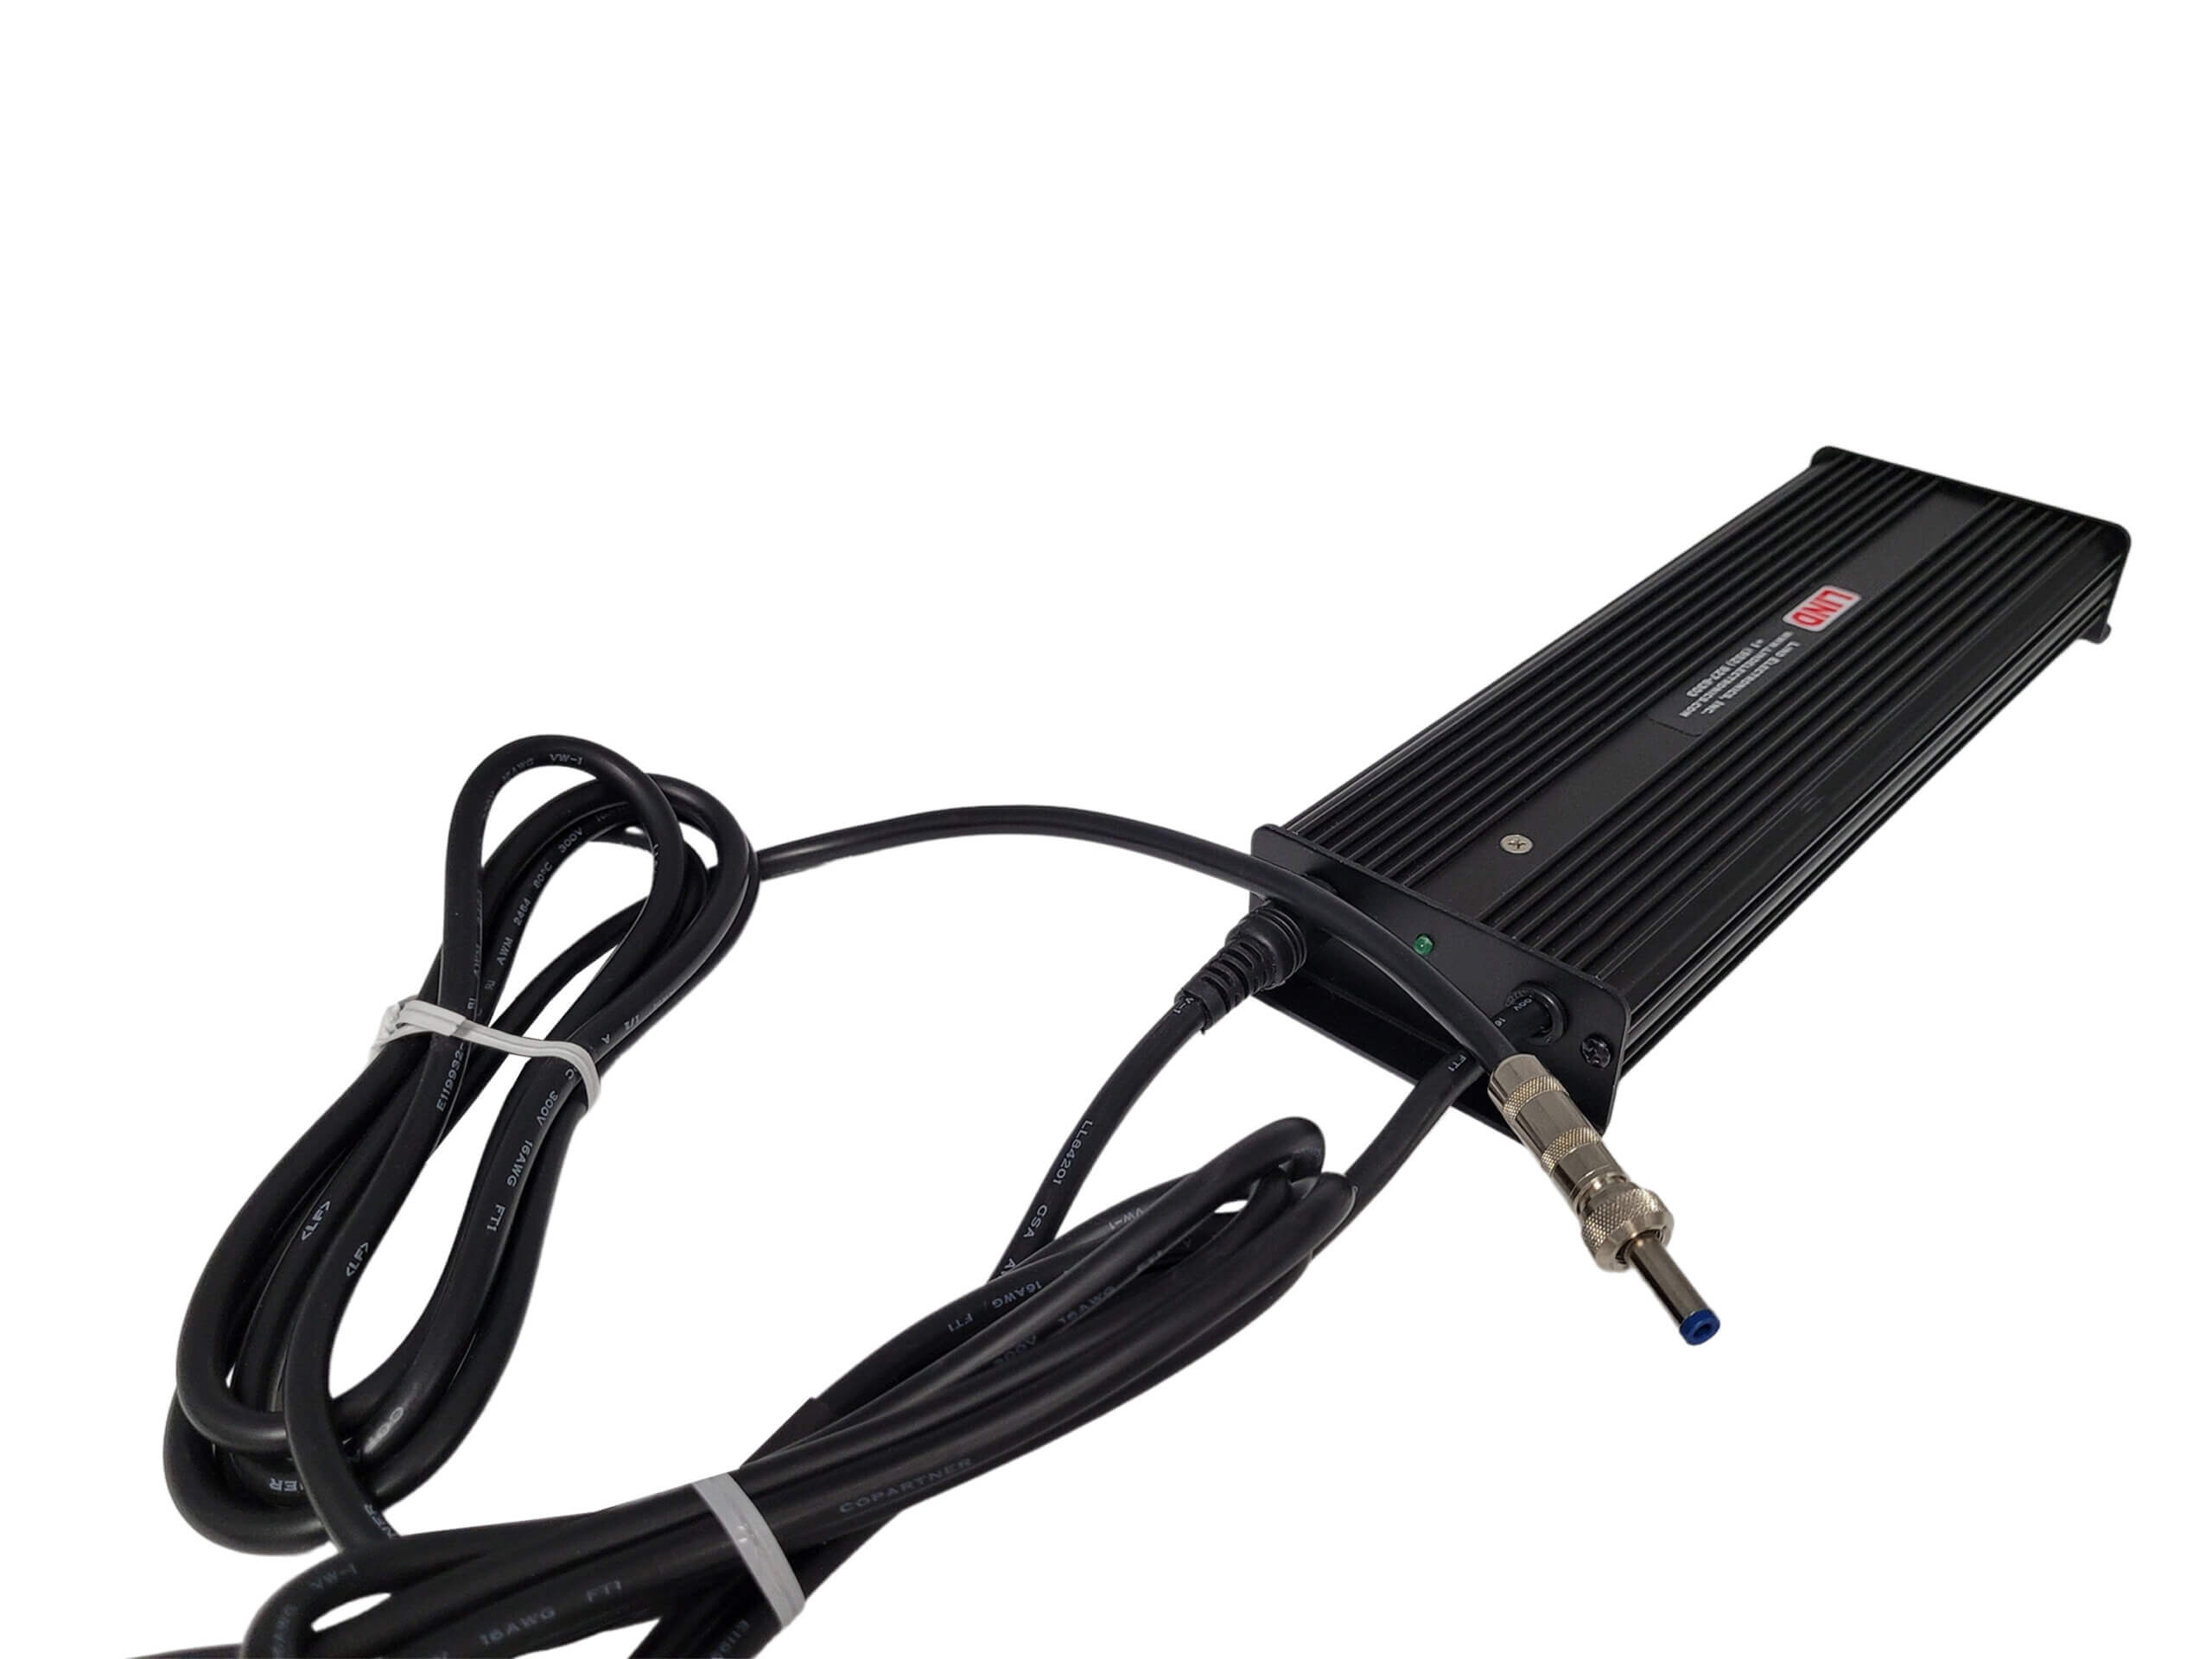 Isolated 90 Watt Power Supply used for 12-32 VDC Input Vehicle with DS-DELL-900 Series Docking Stations